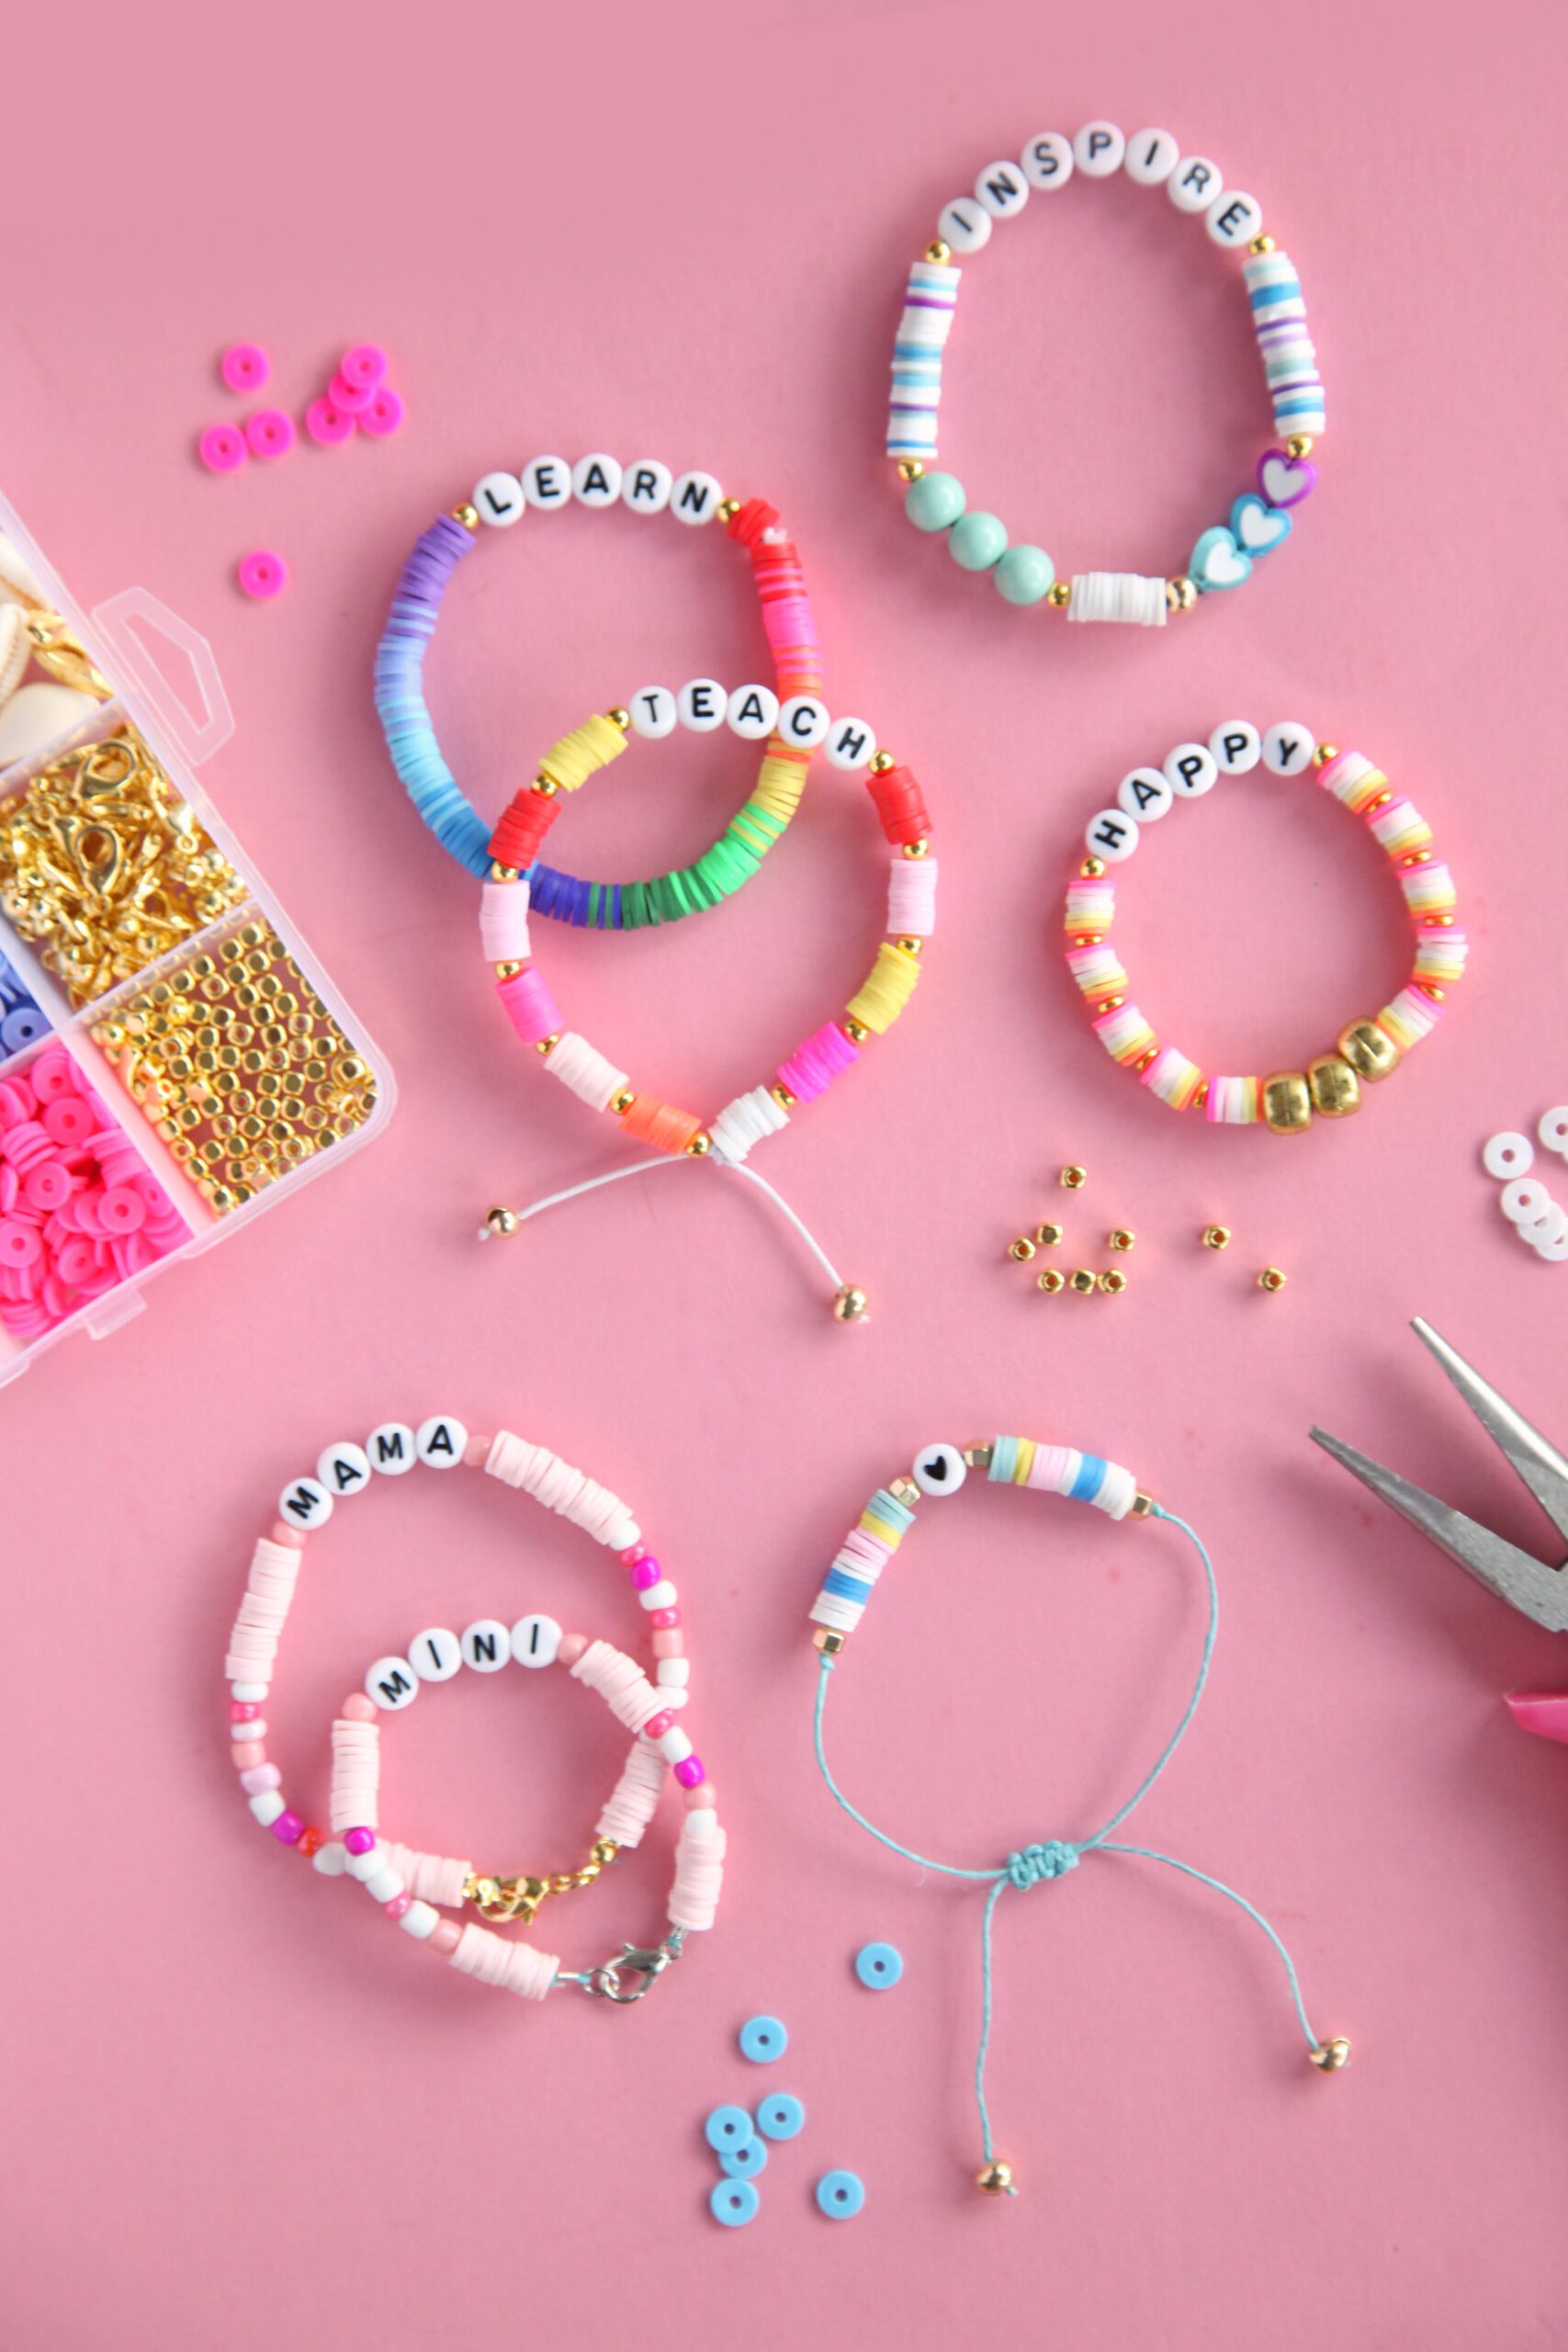 How-to-finish-a-bead-bracelet-6-easy-ways-all